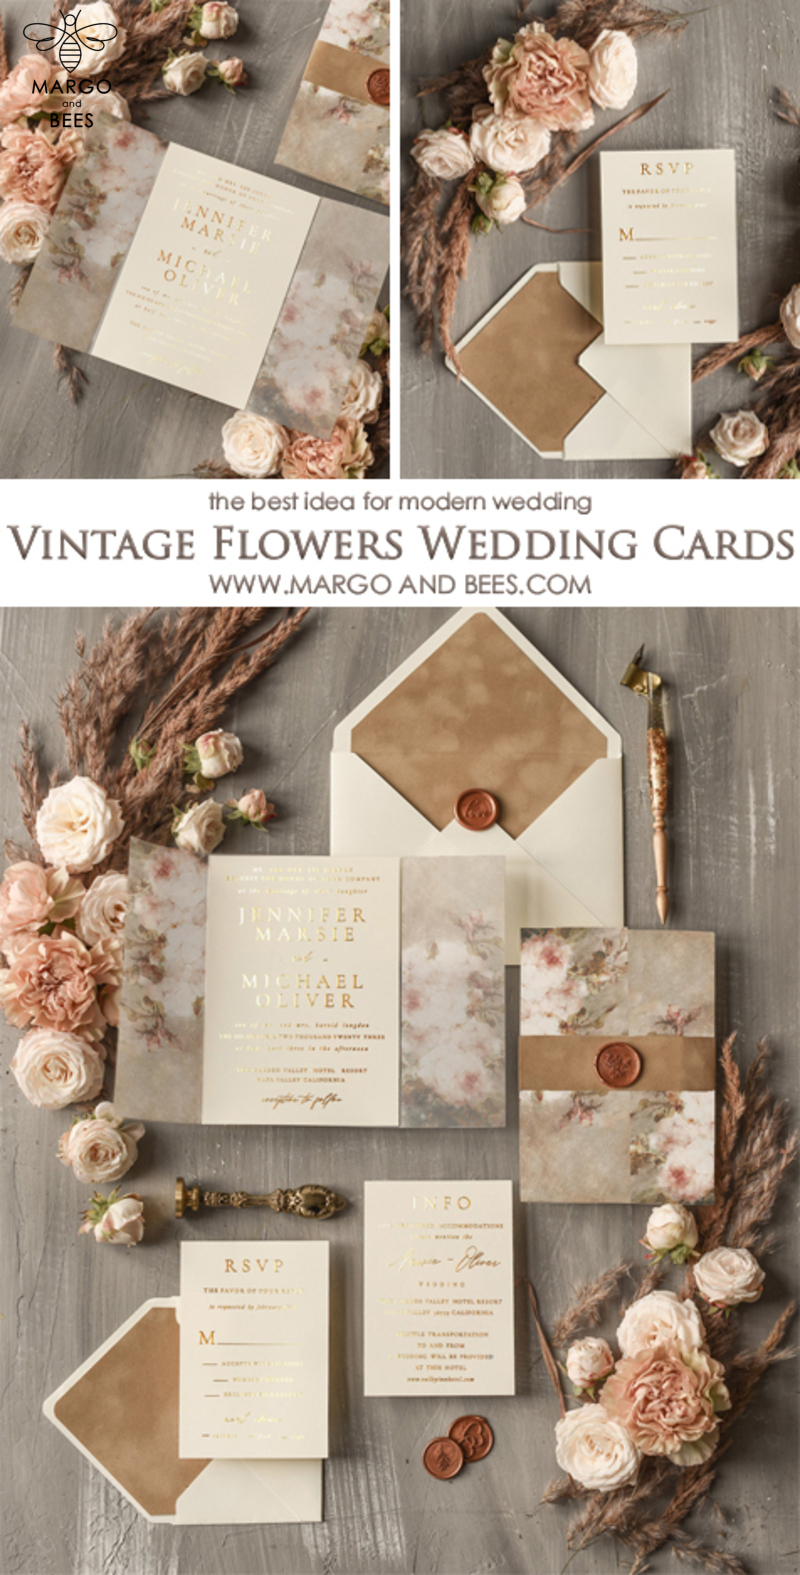 Nude Wedding invitations, Gold Wedding Invites with Vellum Wrapping and Wax seal, Vintage Flowers Wedding Cards-3